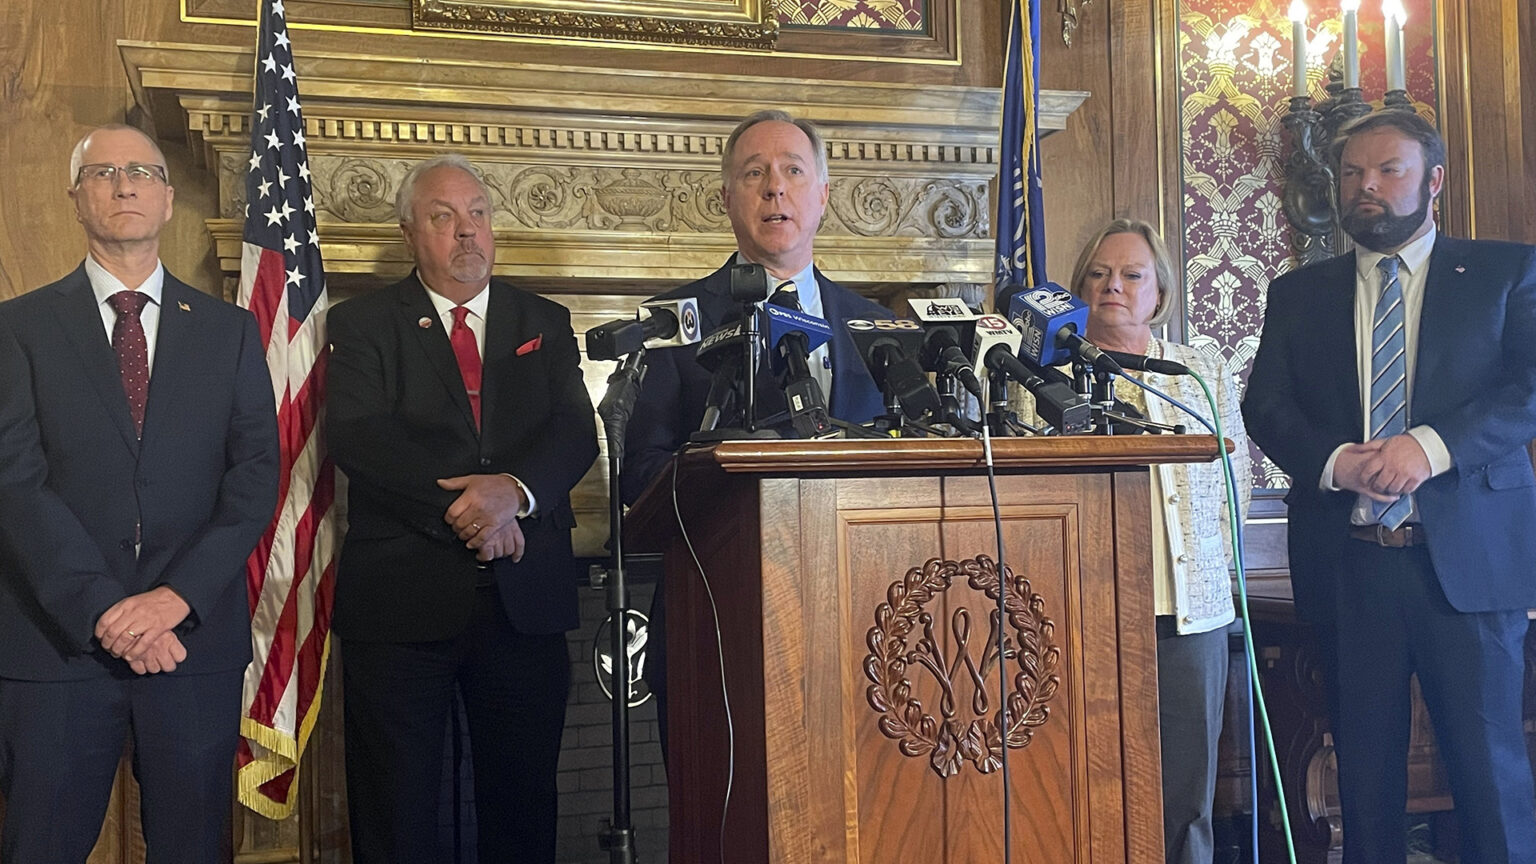 Robin Vos stands behind a wood podium with multiple microphones mounted on it with other Assembly members standing on either side of him in a room with wood-paneled walls, sconce-style lighting fixtures, a painting and the U.S. and Wisconsin flags.